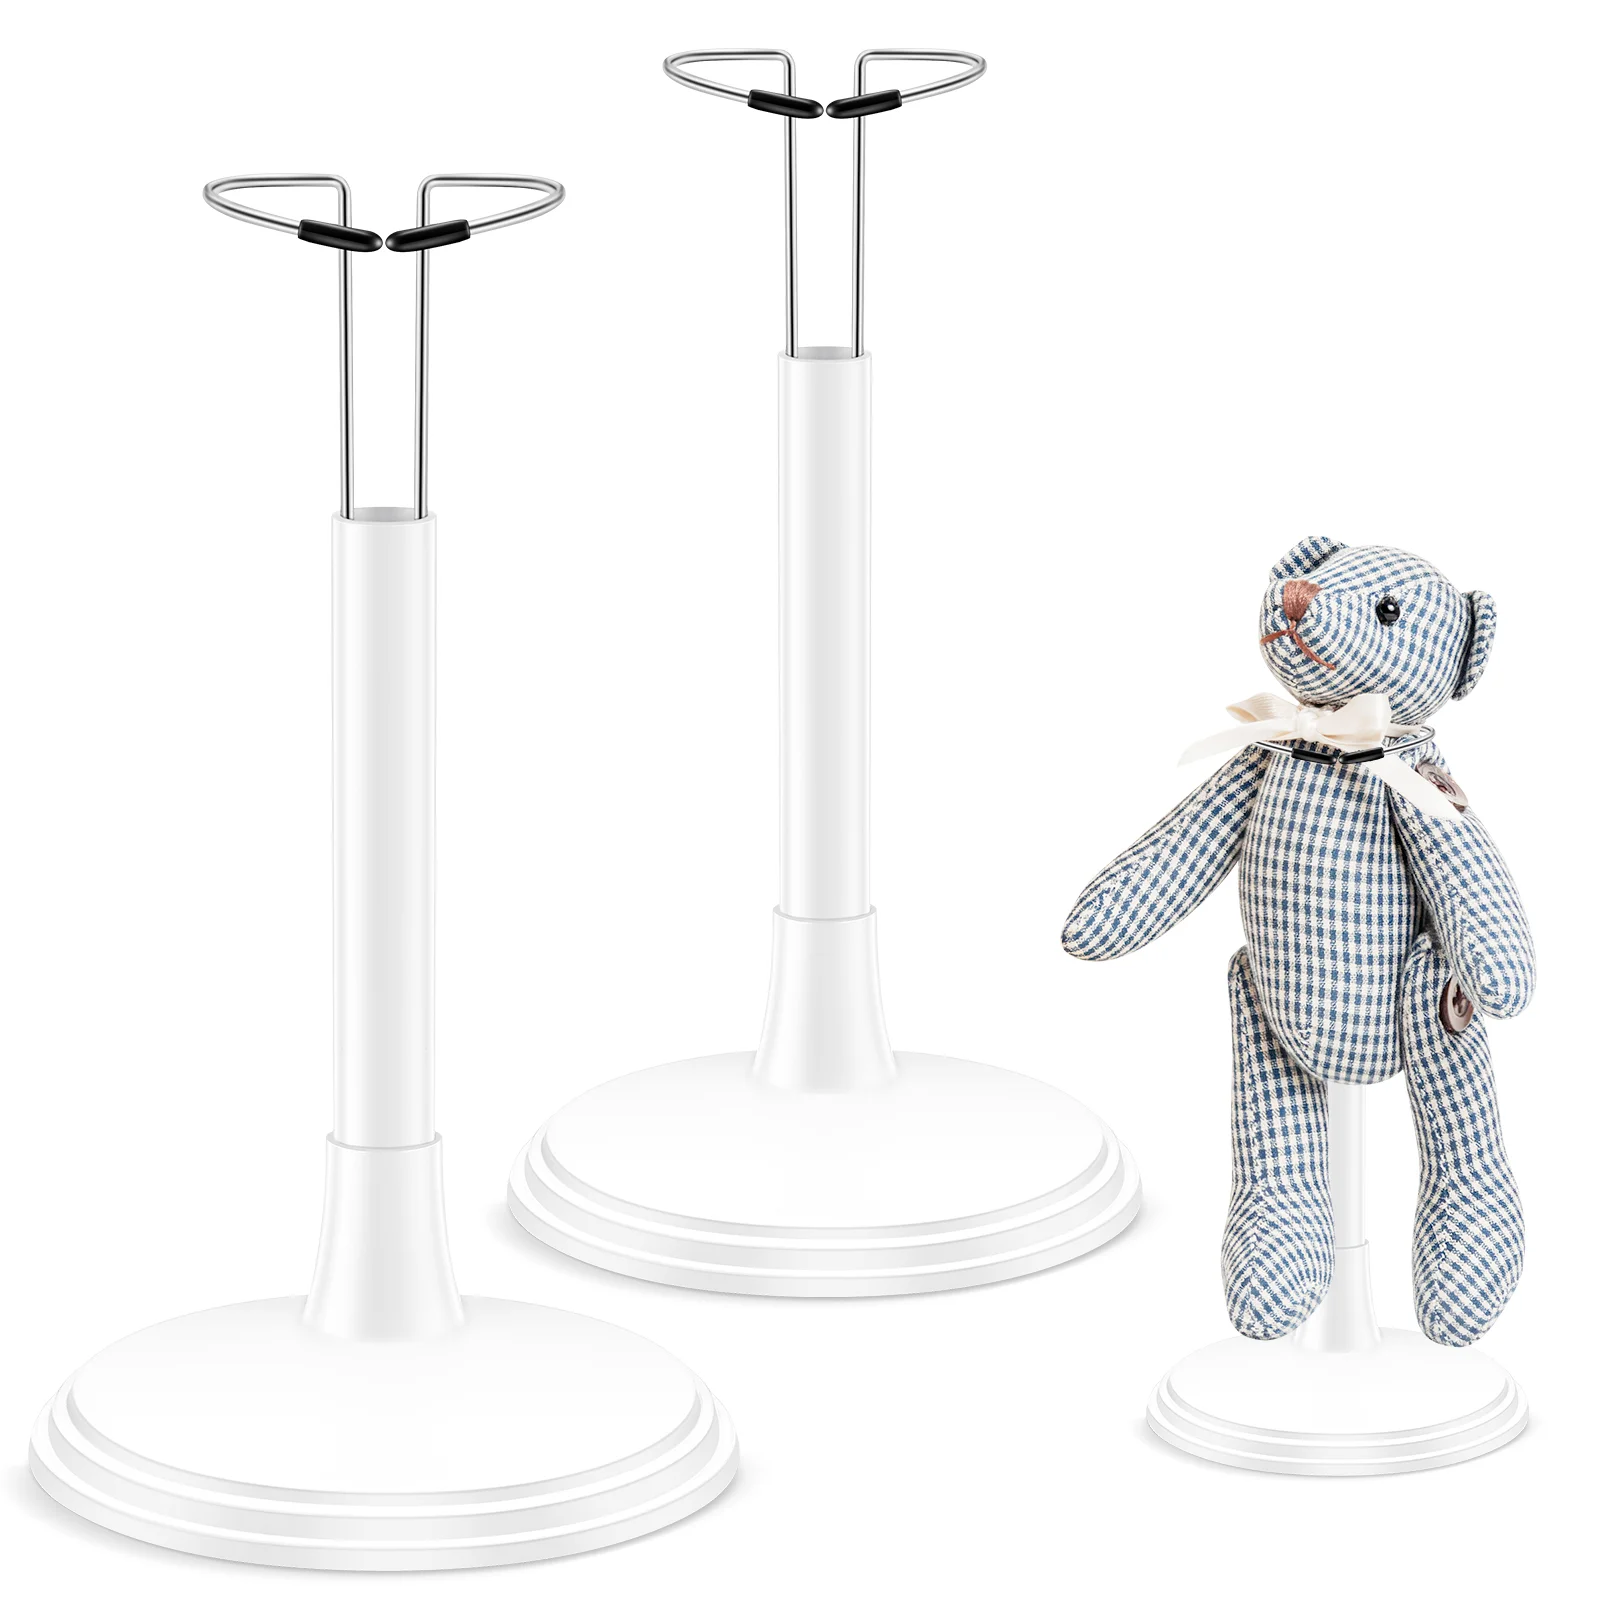 Adjustable Metal Doll Brackets Doll Support Stands Doll Puppet Wrist Stand Holder Dollhouse Display Accessories book baffle bookshelf organizers heavy duty bookends file metal for shelves stands crafted